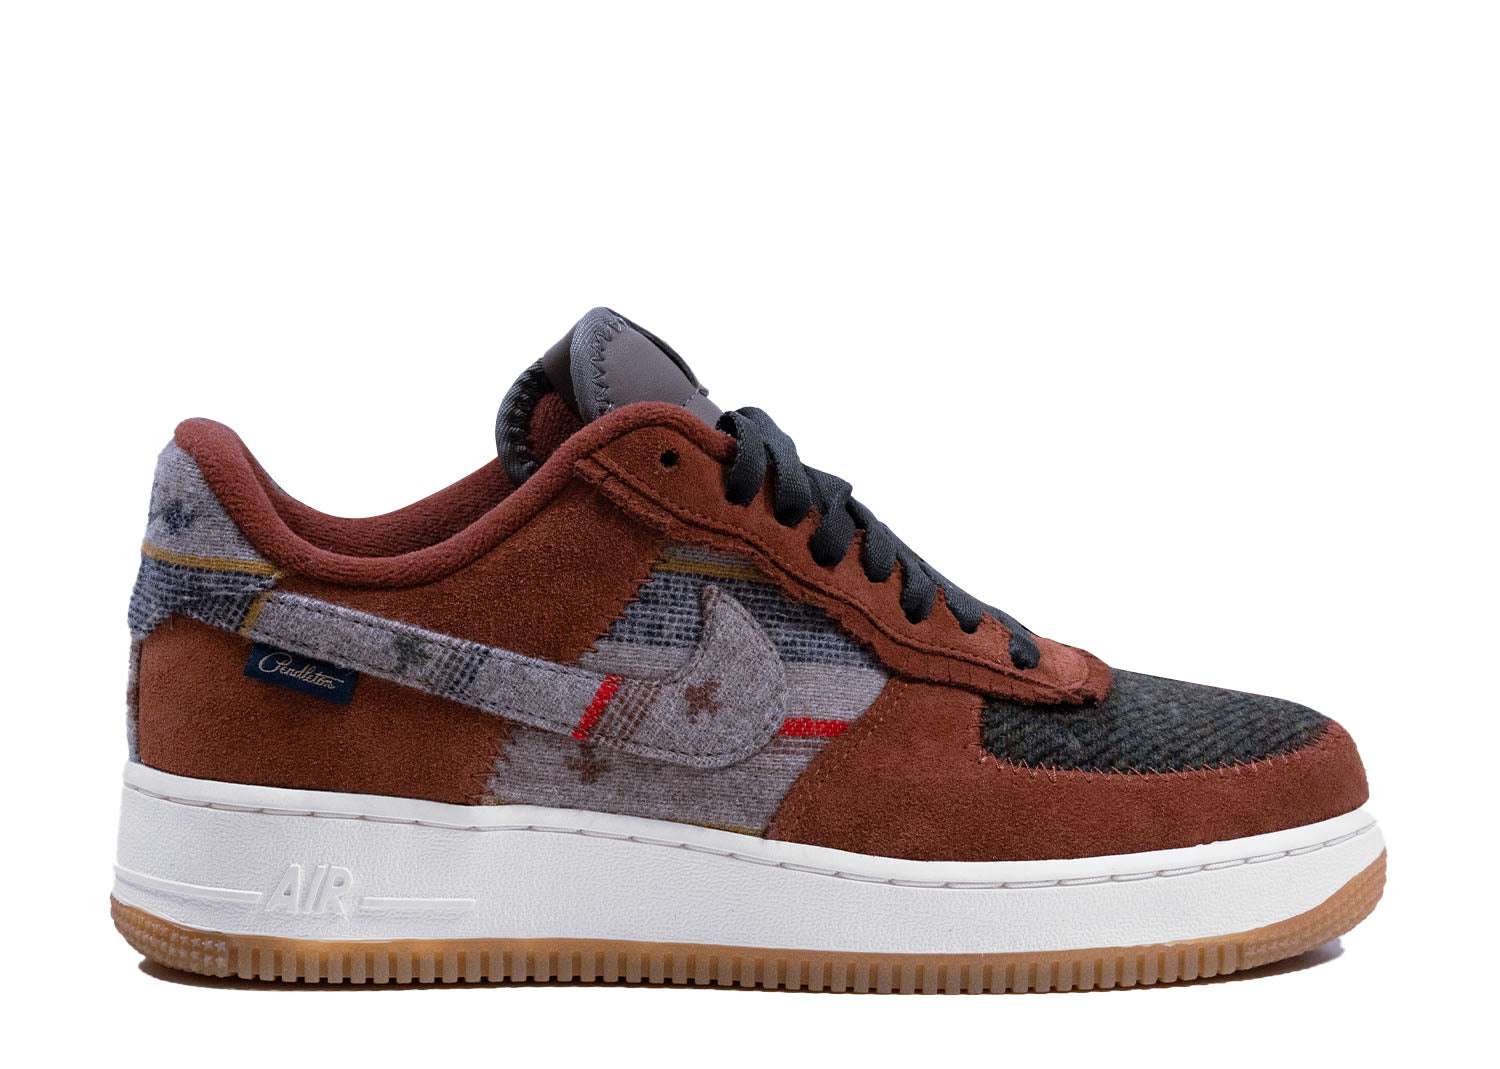 Second Chance - Multi Nike Air Force 1 ID Pendleton Brown - 41 | NEW